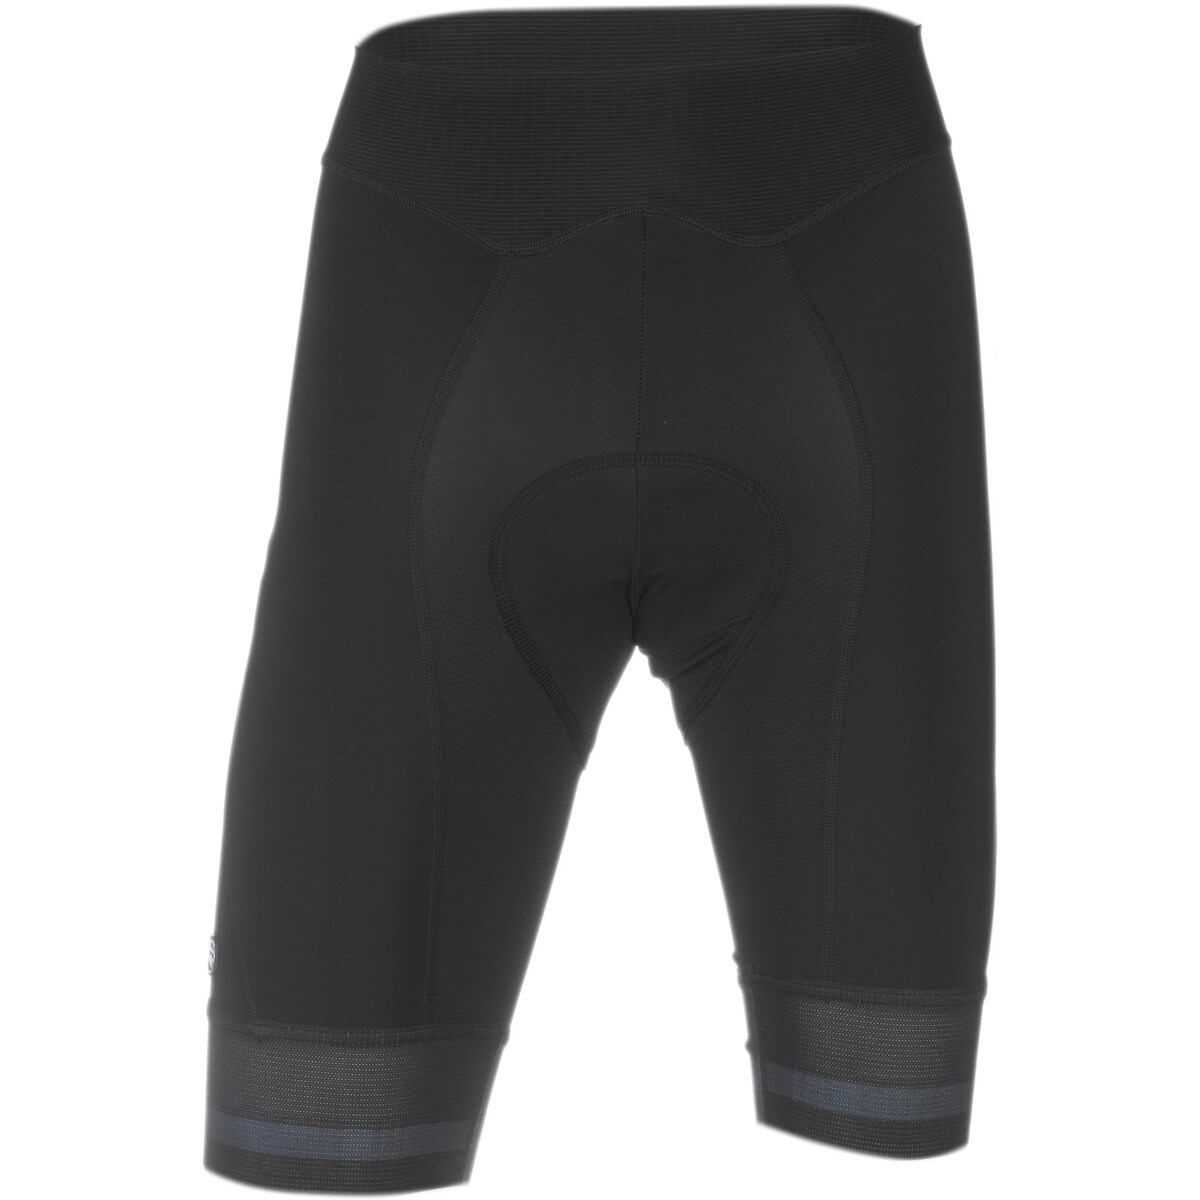 Giordana FormaRed Carbon Shorts with Cirro Insert Mens